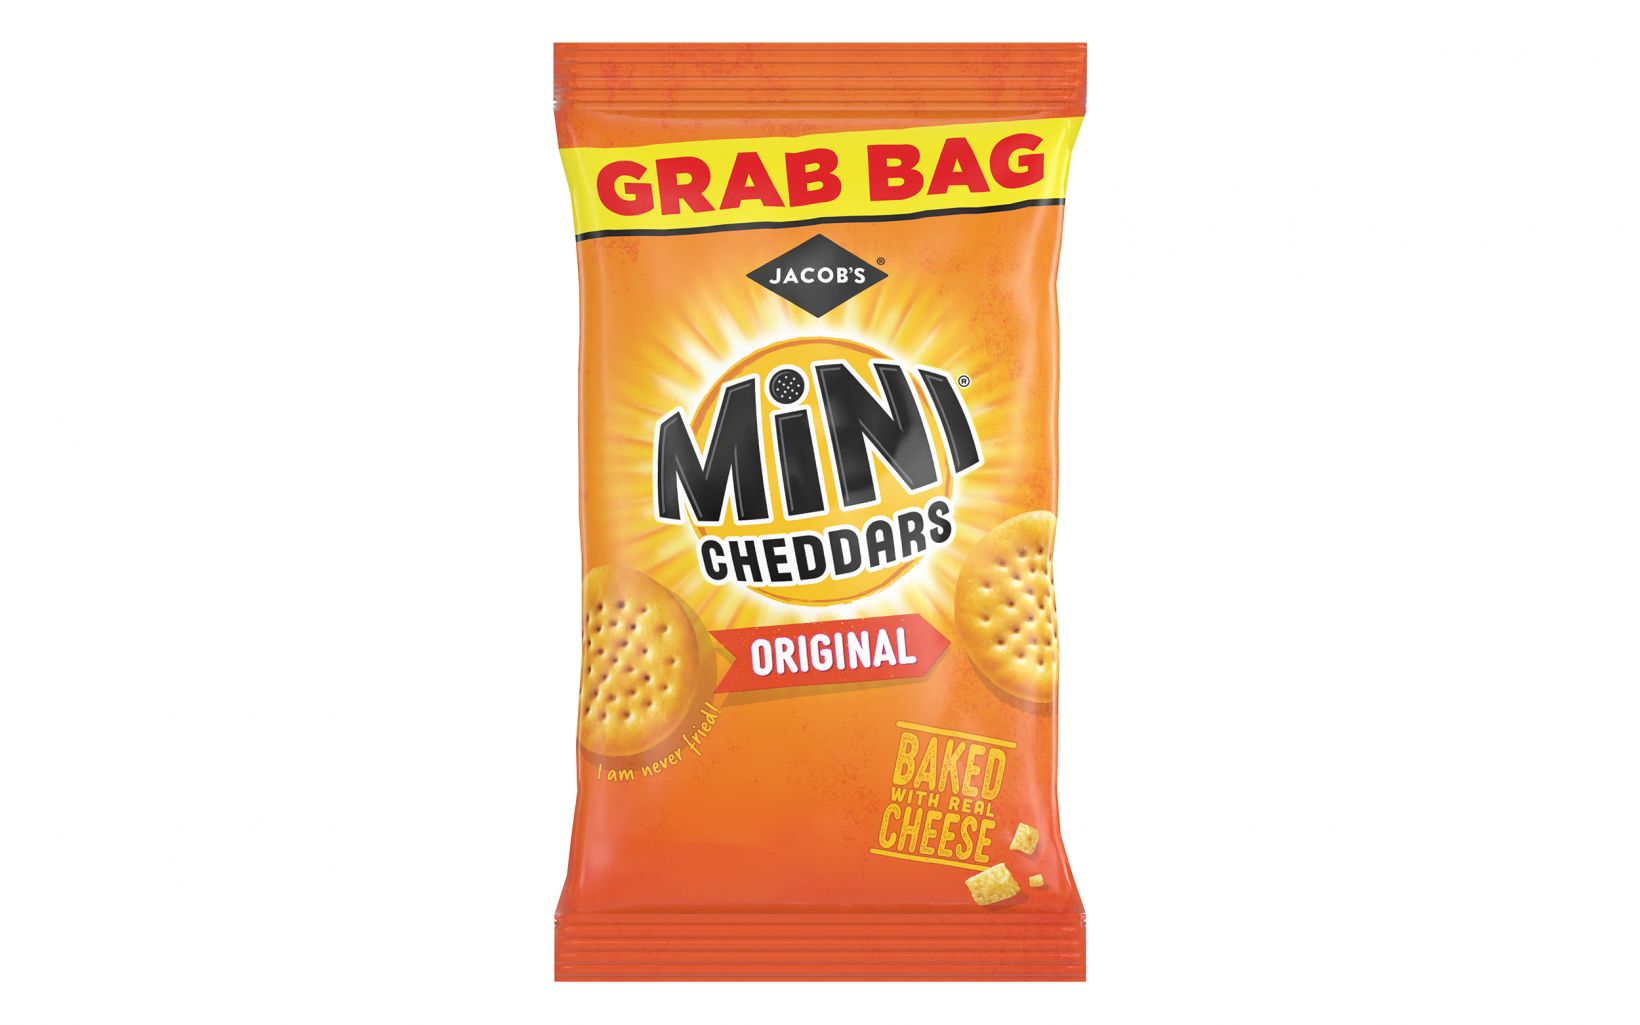 33772 Jacobs Mini Cheddars Grab Bag Original Weight Out 2021 2d Oct 20 2021 1 